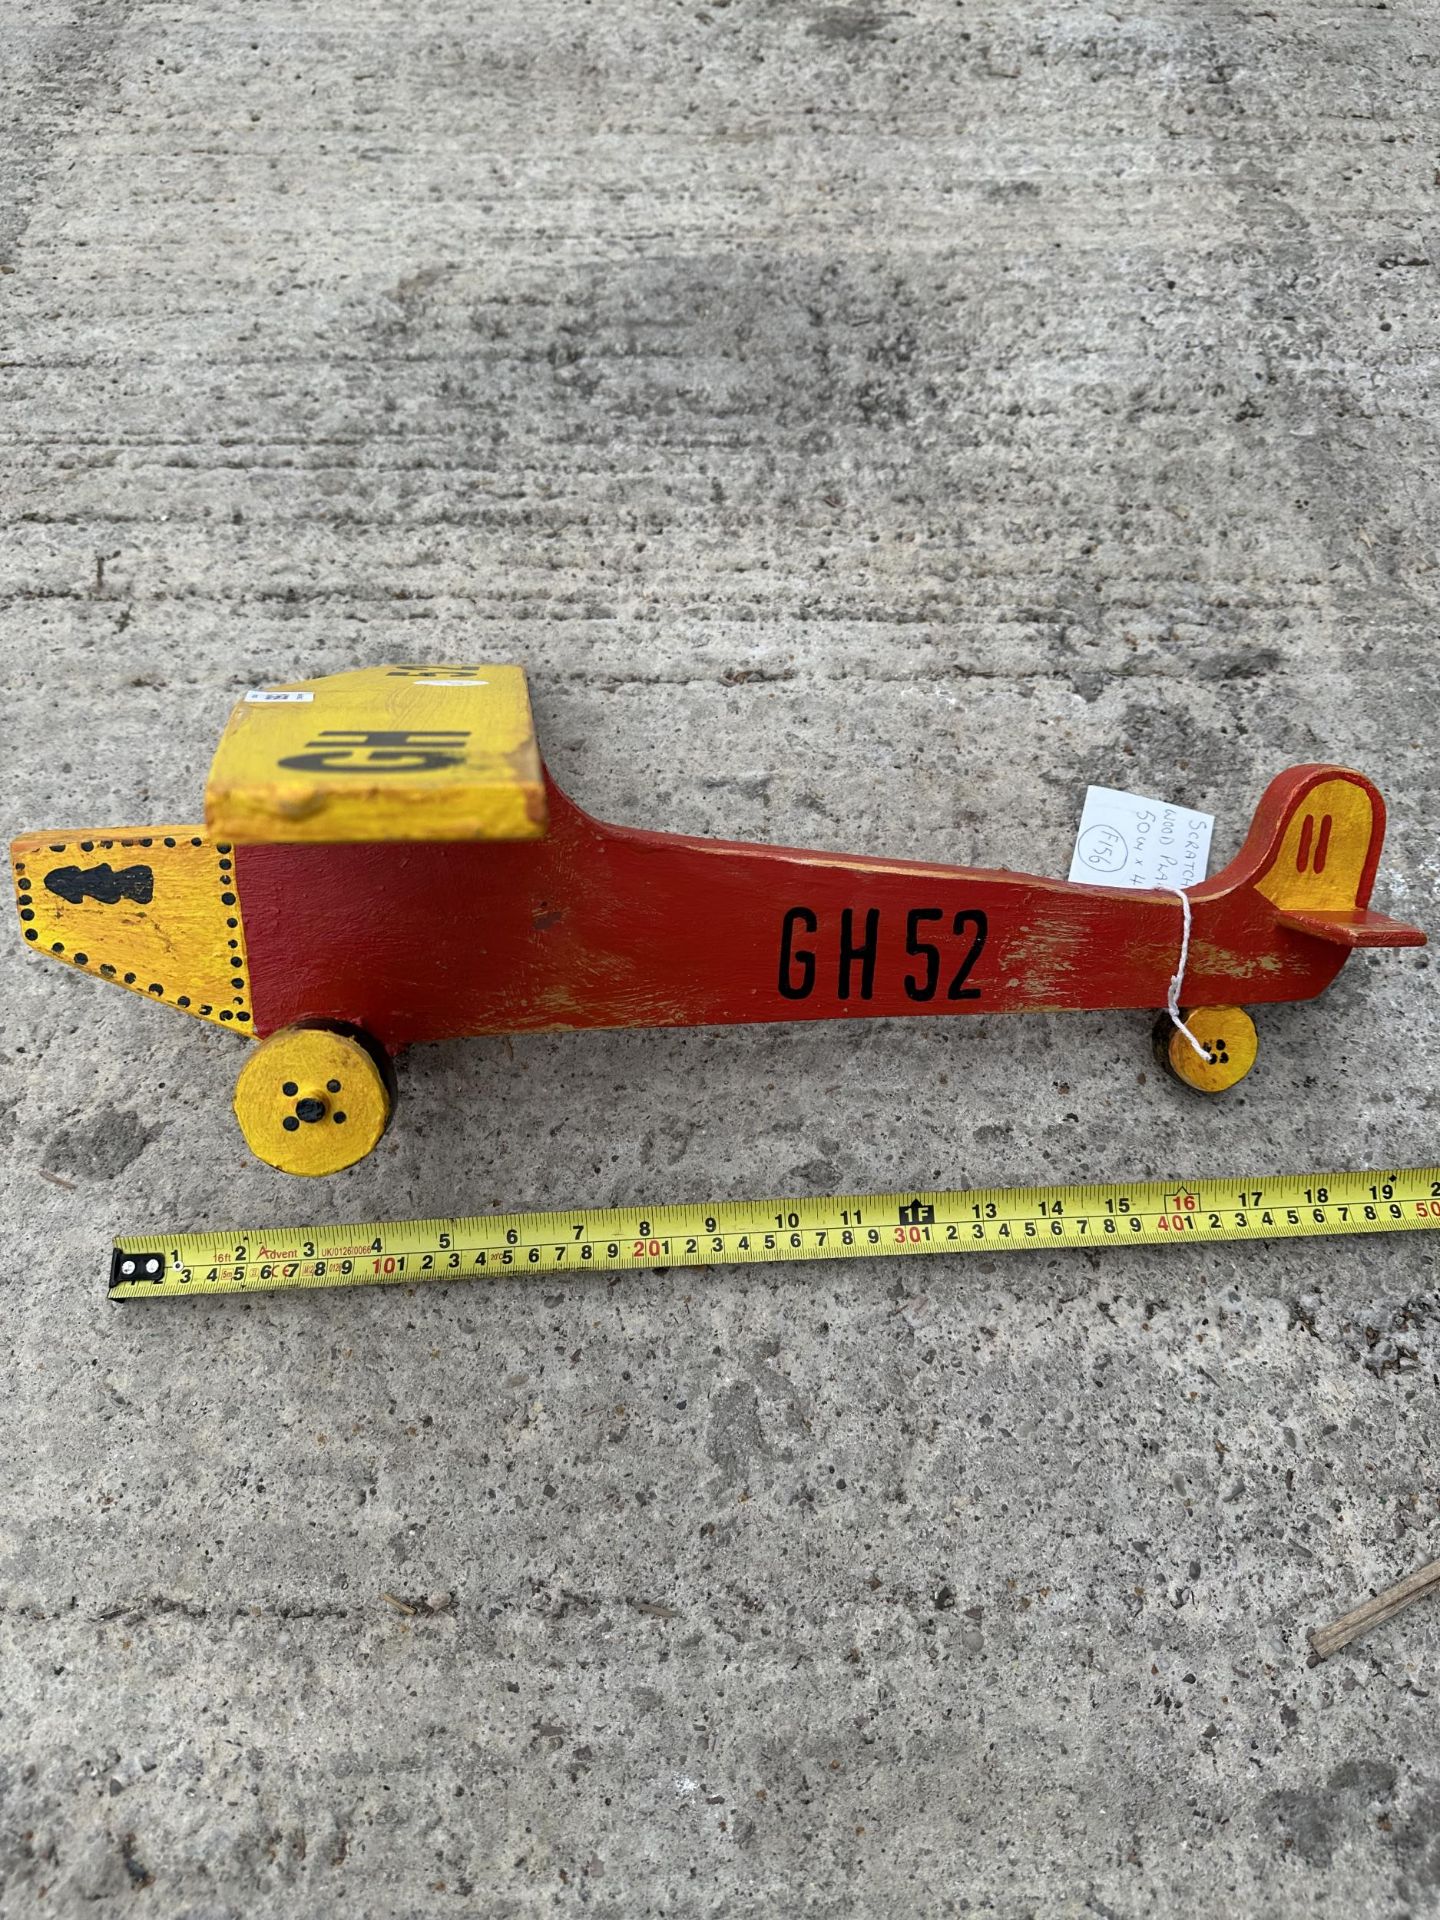 A SCRATCH BUILT WOODEN HAND PAINTED PLANE - Image 4 of 4